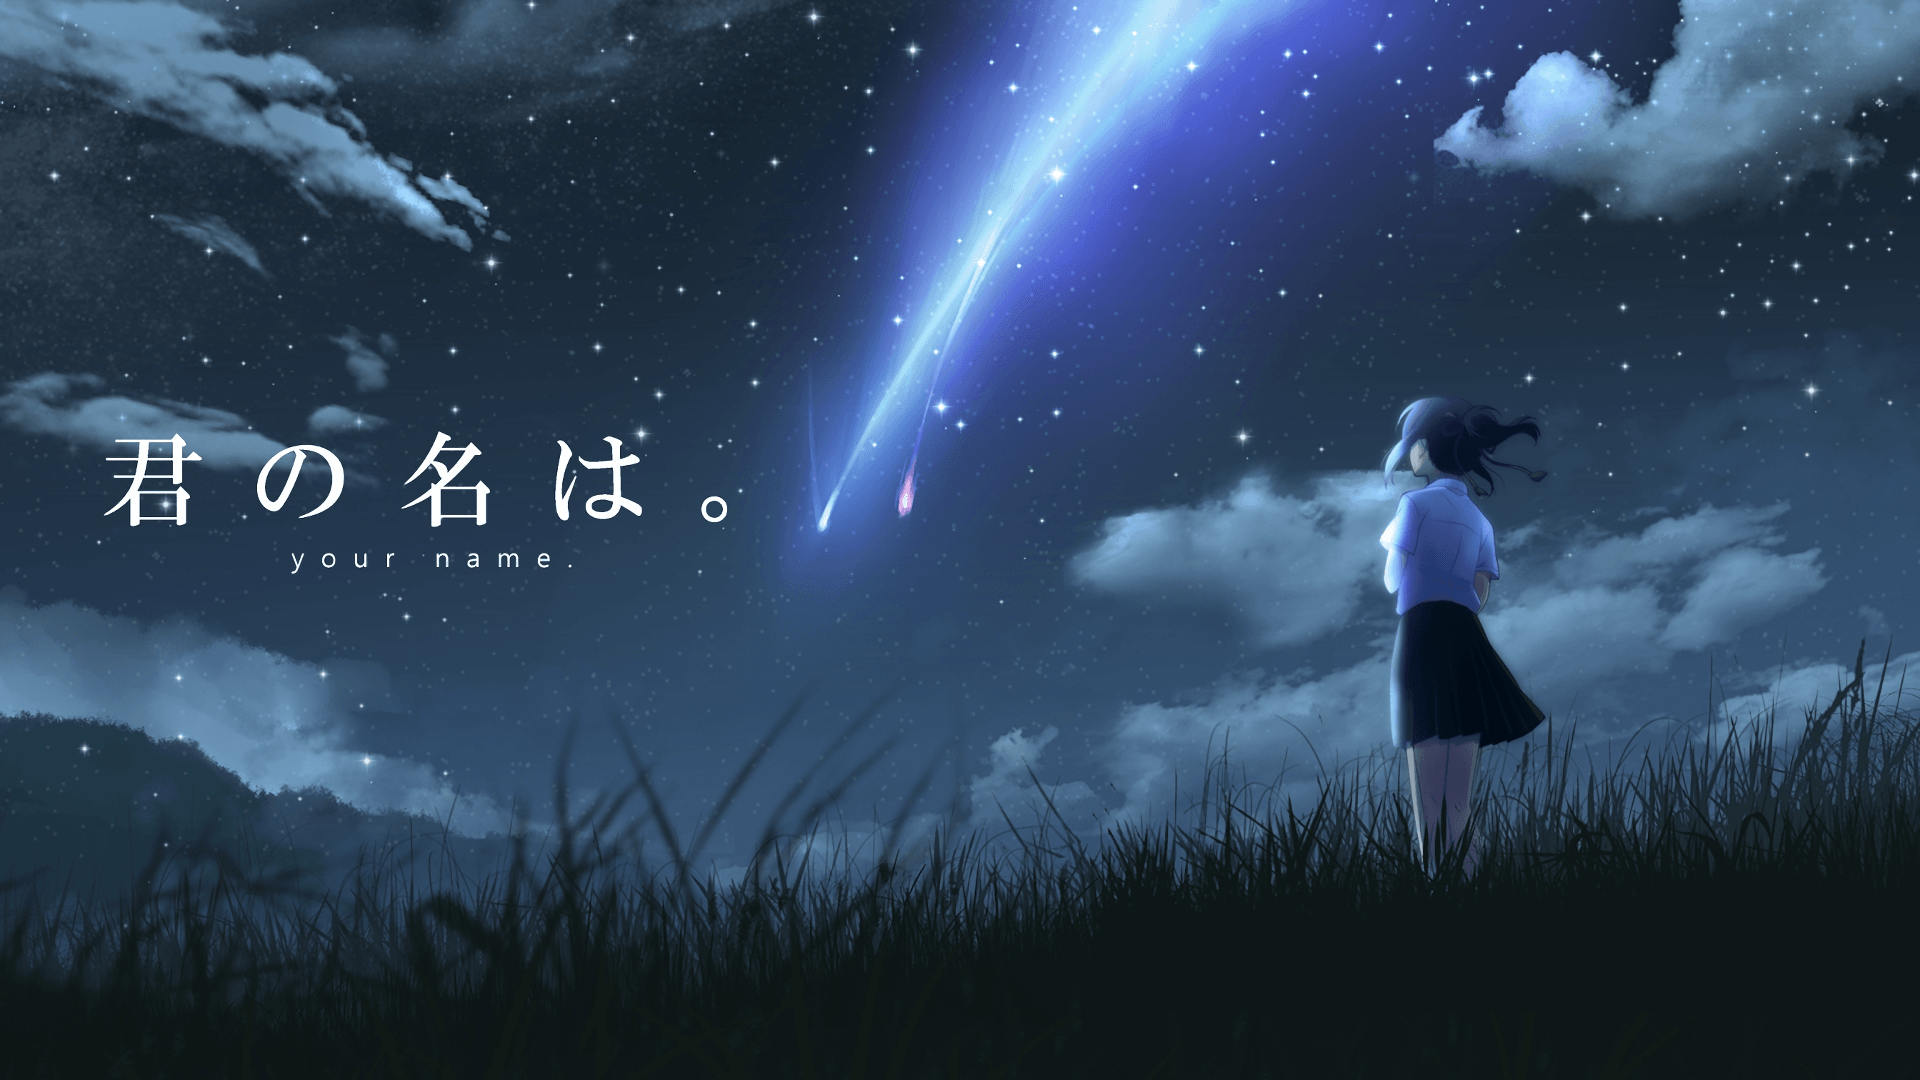 Anime Desktop Your Name Wallpapers - Wallpaper Cave